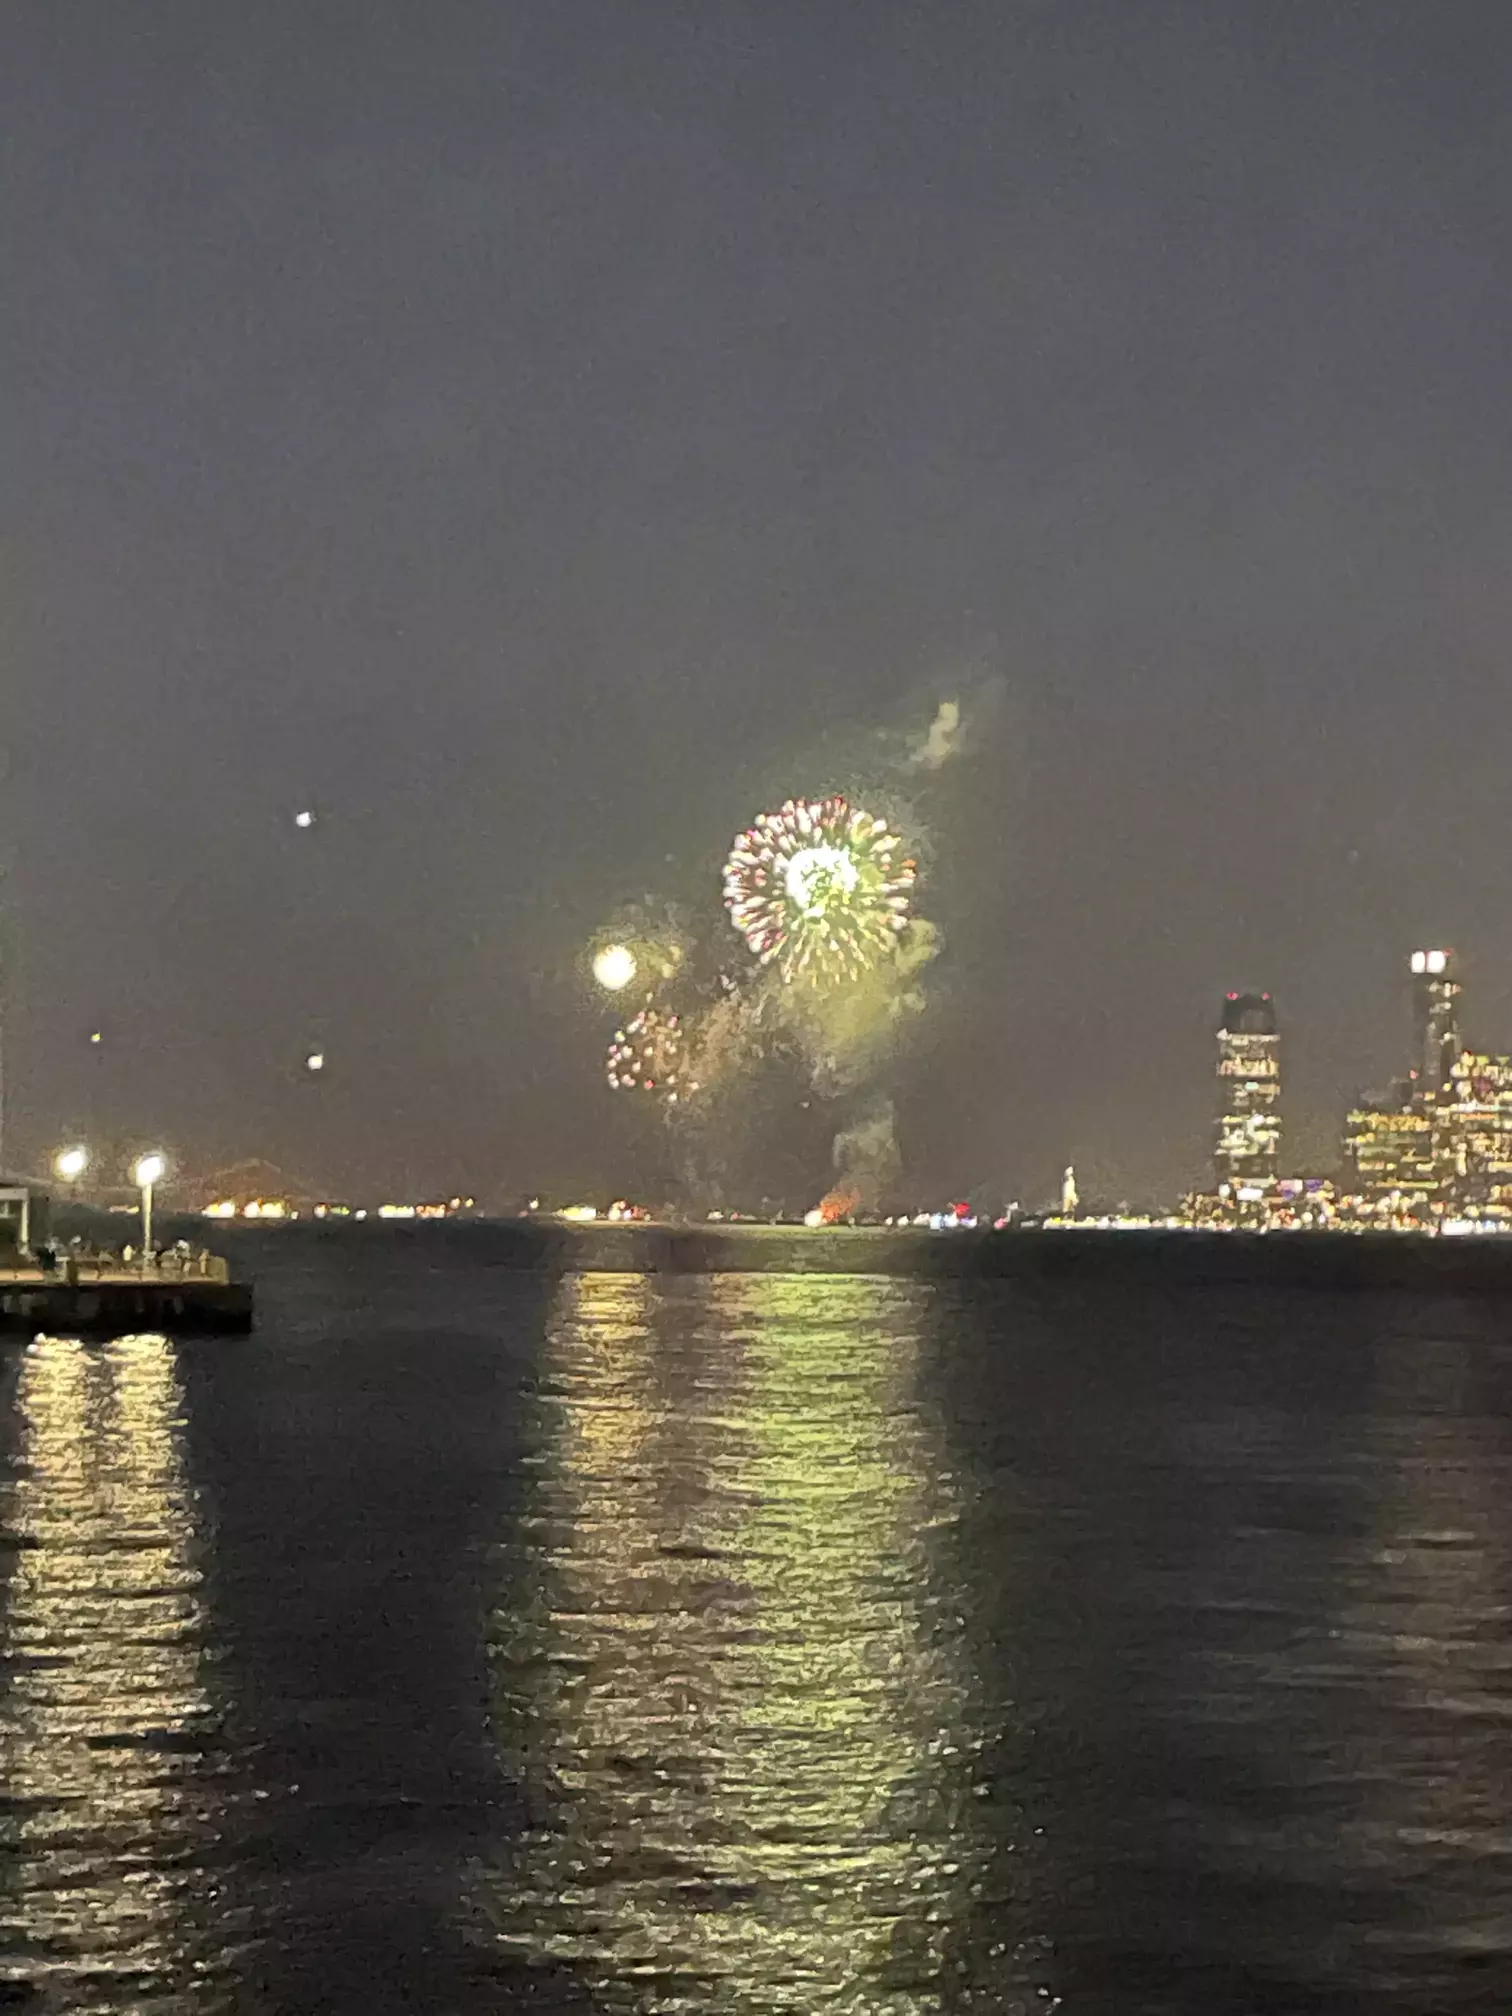 Jersey city fireworks as seen from Manhattan looking southwest, with the Statue of Liberty on the right